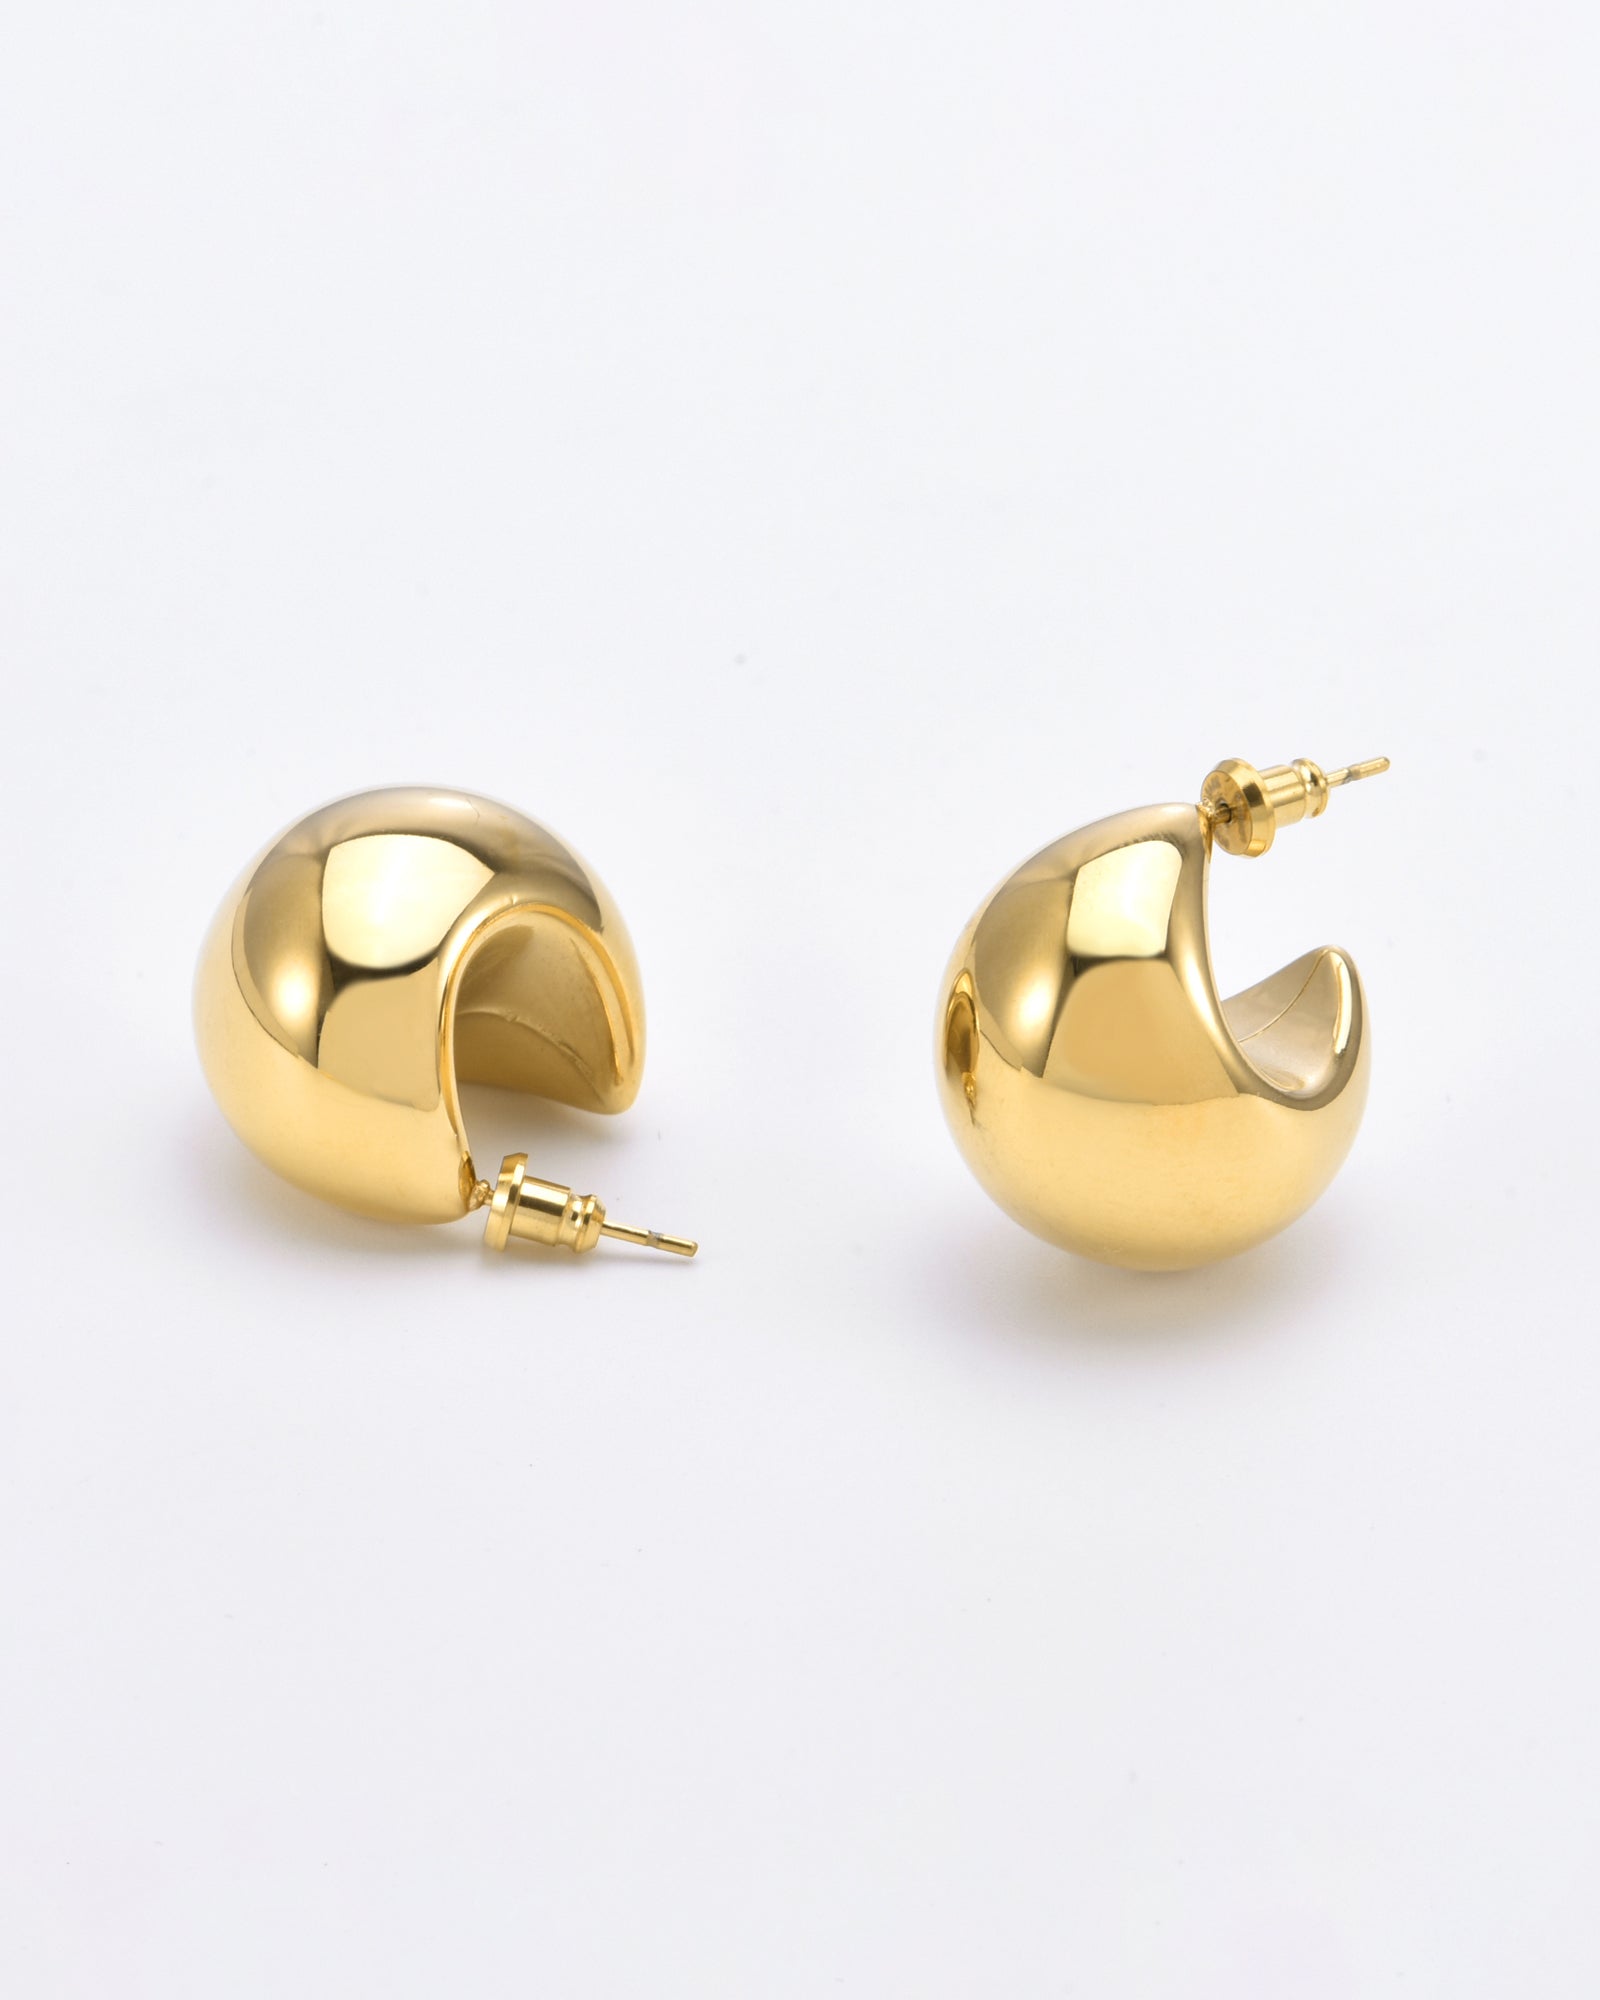 A pair of small, polished 24k gold Orbit Earrings Gold from For Art's Sake® is displayed against a plain white background. The earrings have a thick, rounded design and are slightly open with post-back closures.